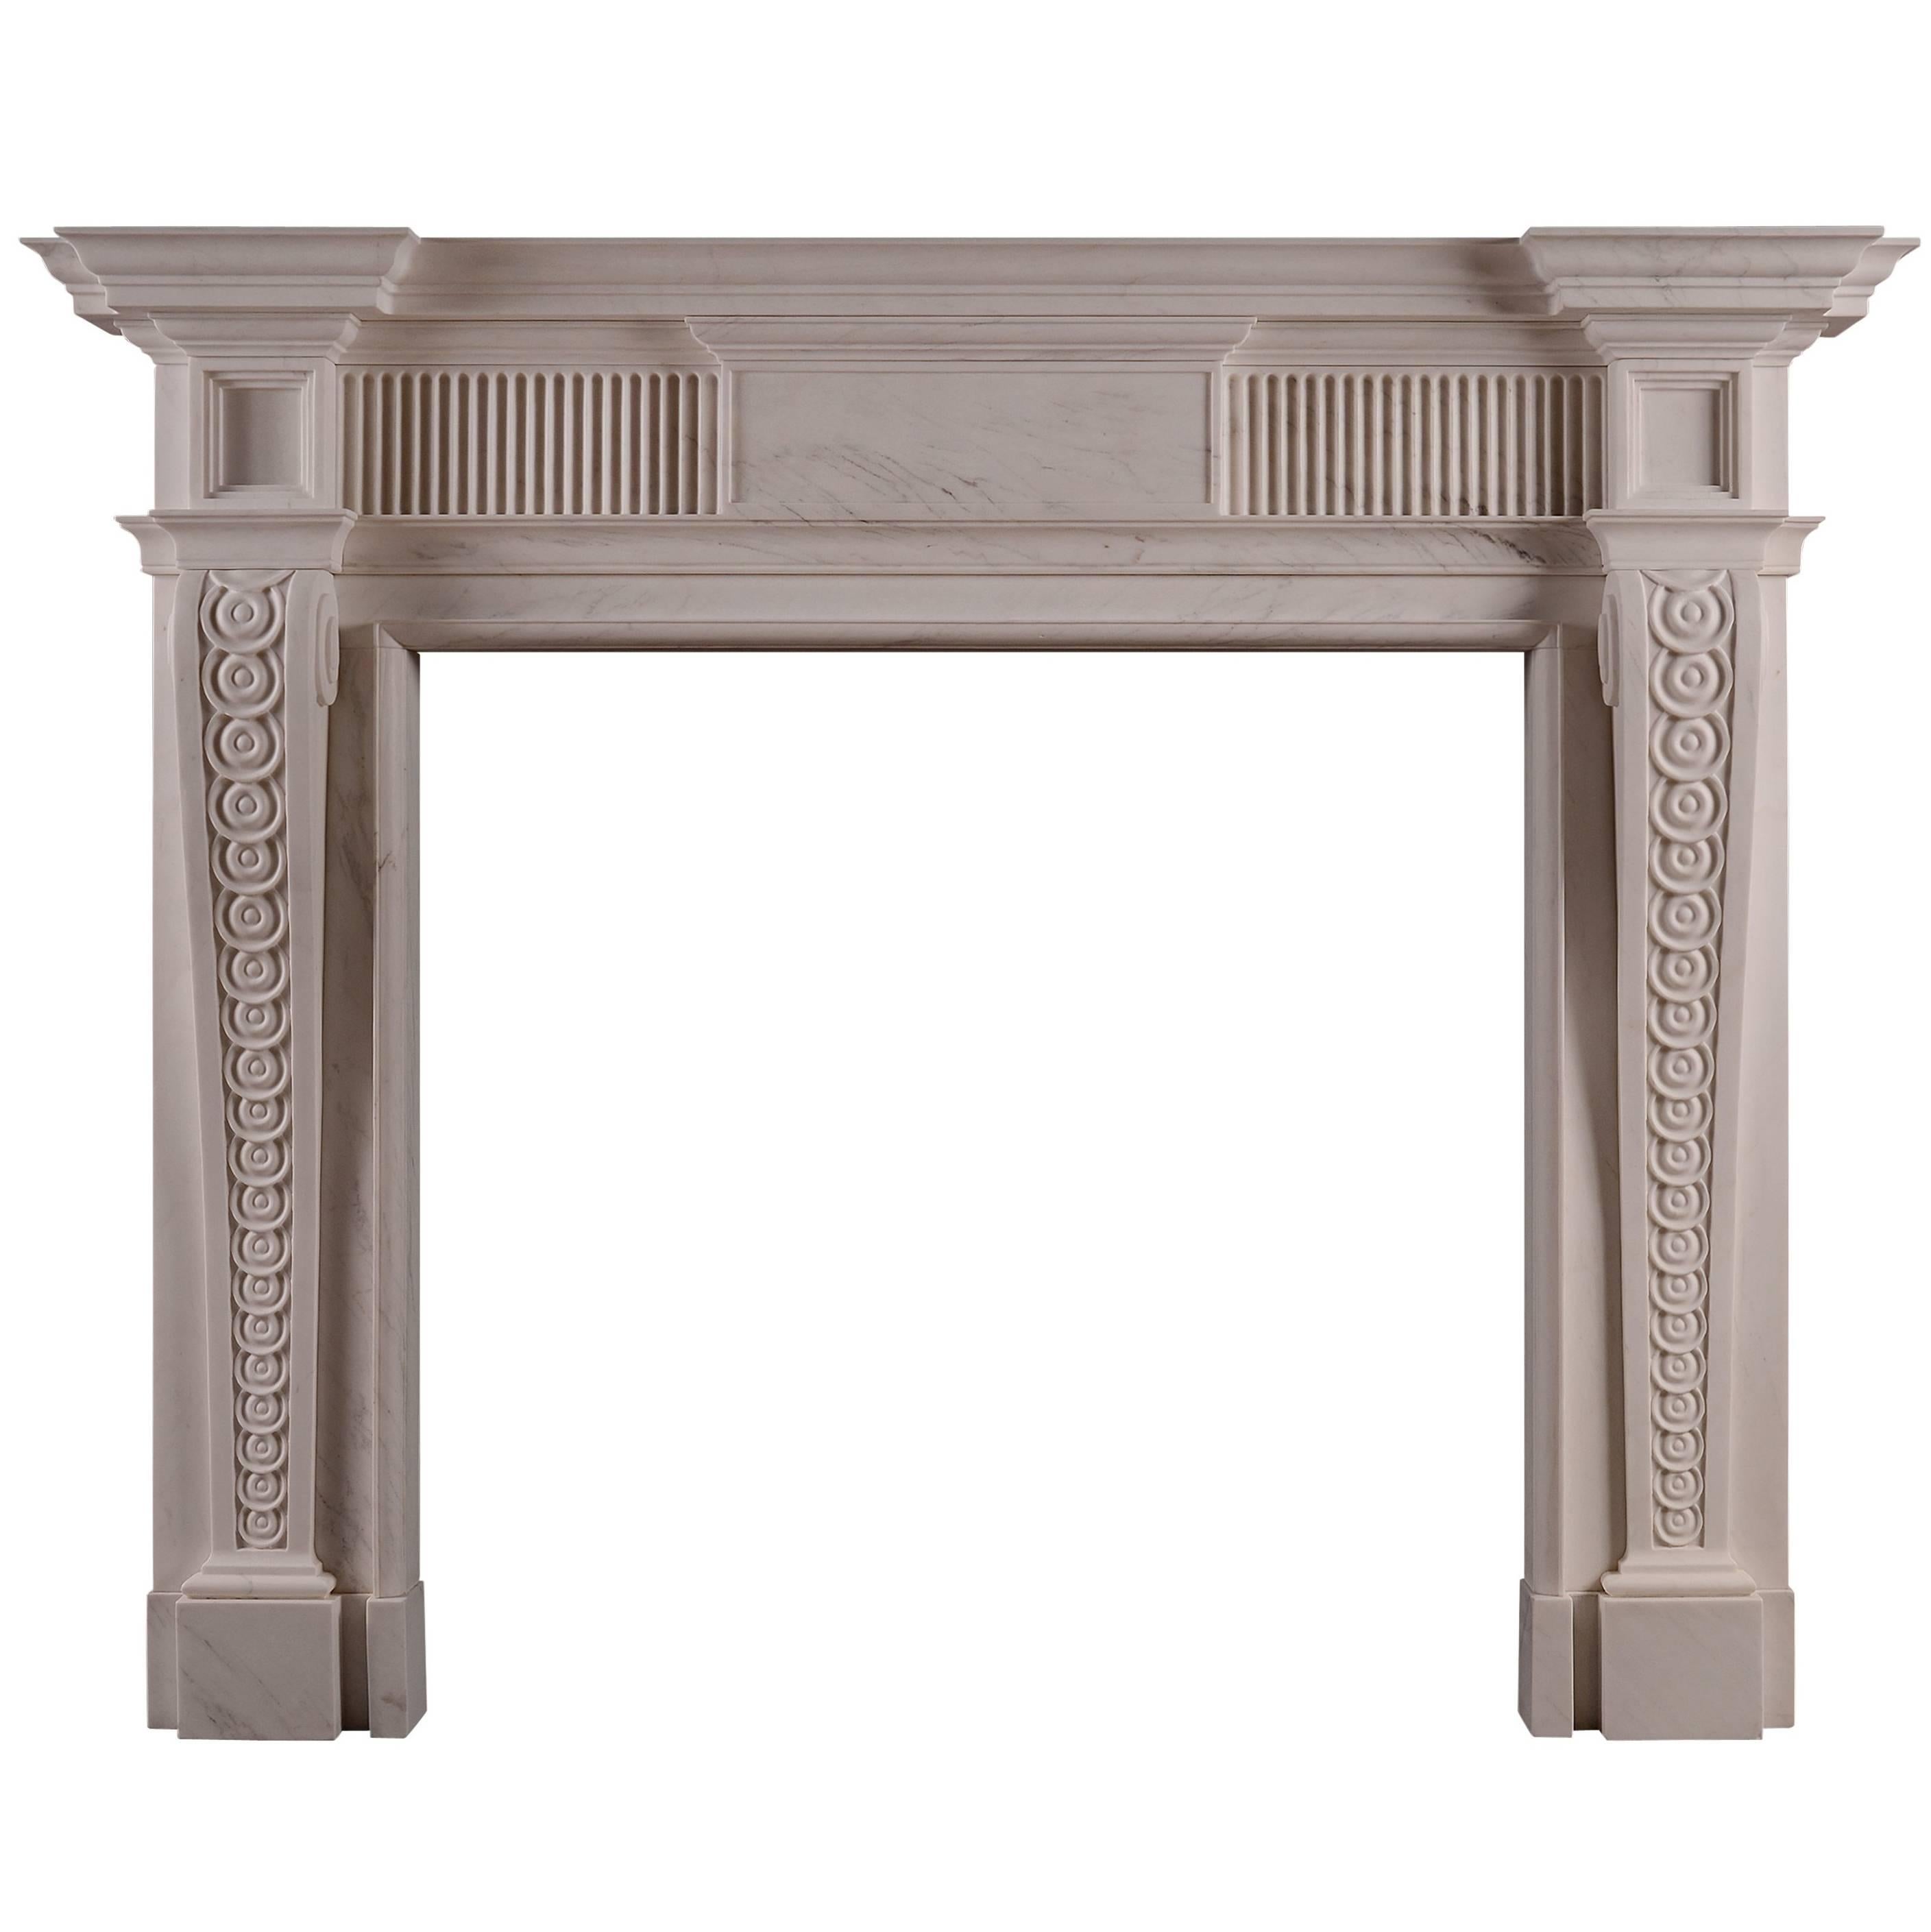 George II Style White Marble Fireplace For Sale